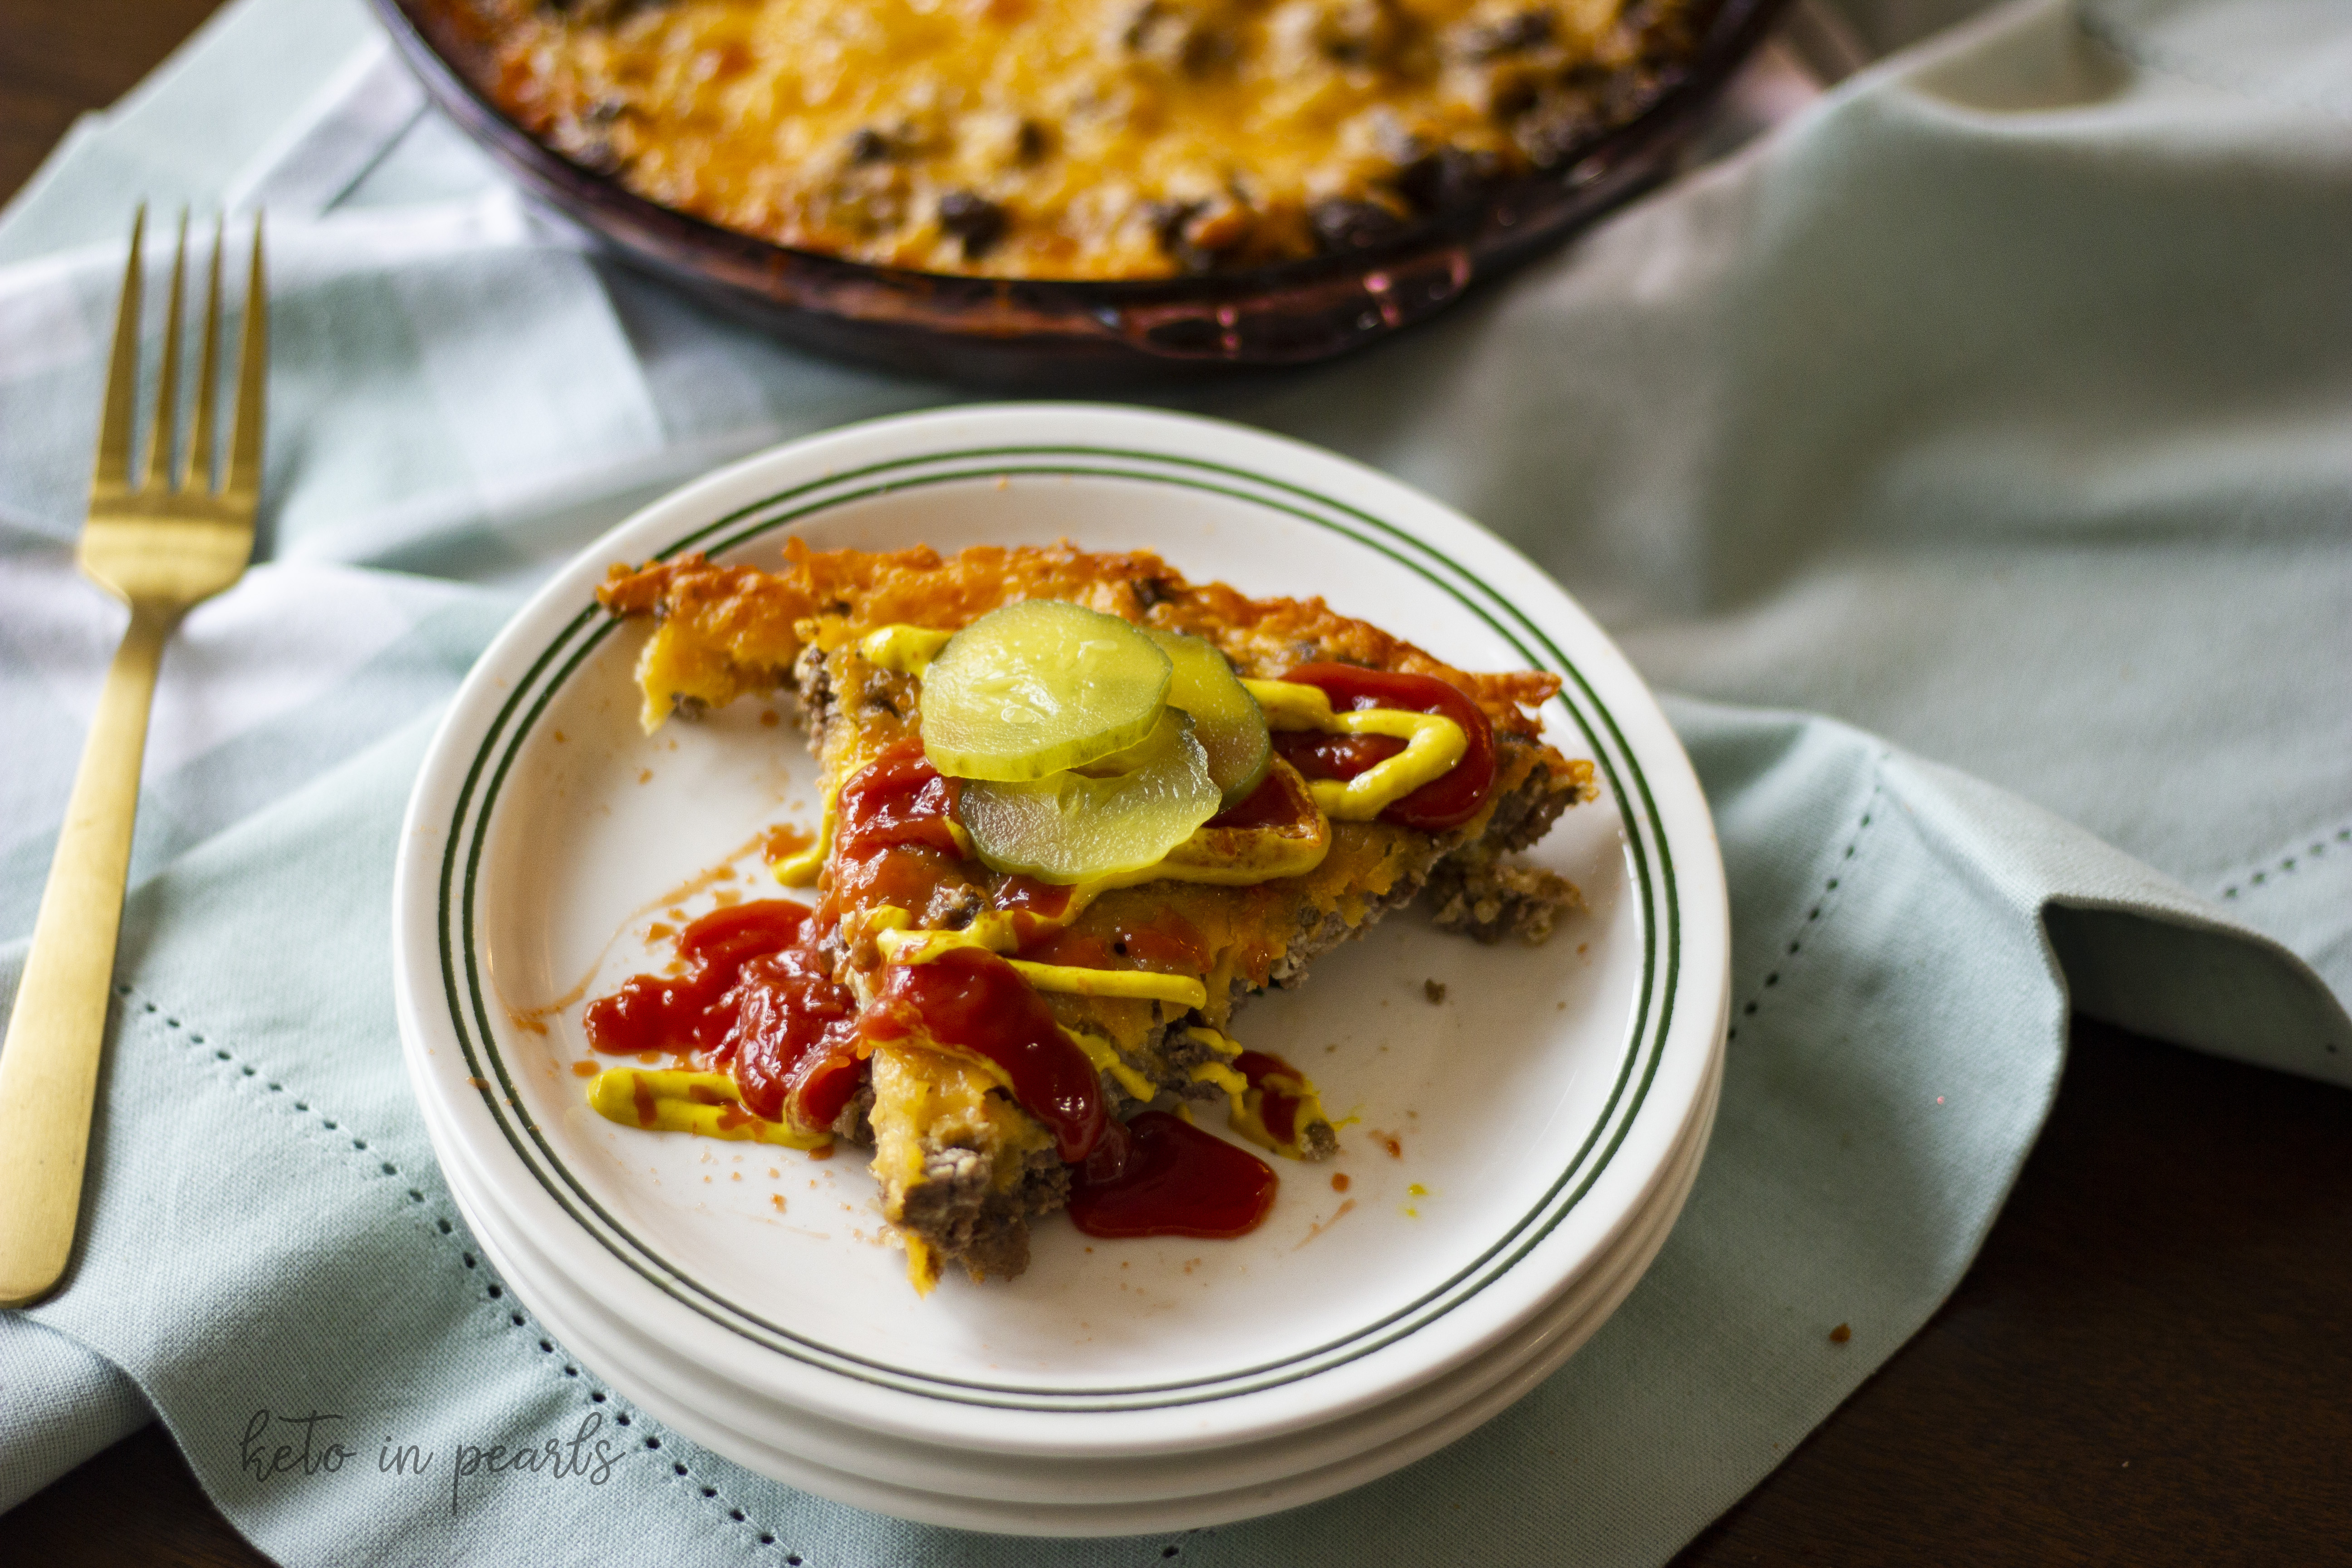 Keto Cheeseburger Pie is a low carb alternative to the bunless burger. A 30 minute meal the whole family will enjoy! Only 2 carbs per serving.